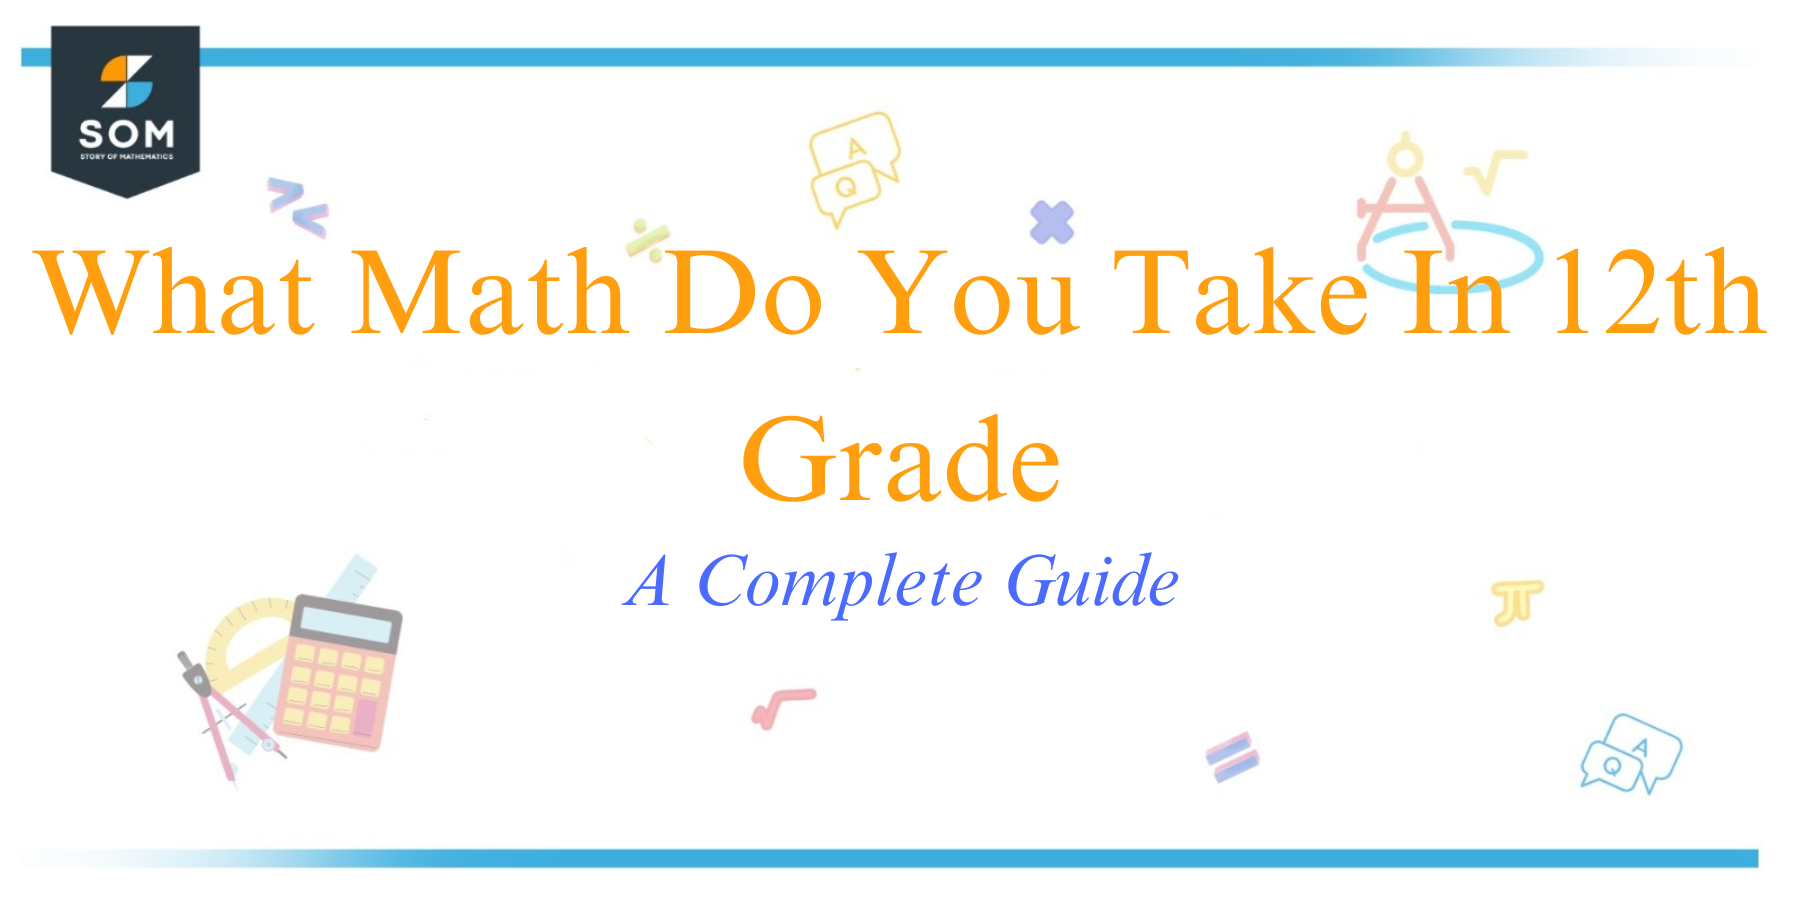 What Math Do You Take In 12th Grade A Complete Guide